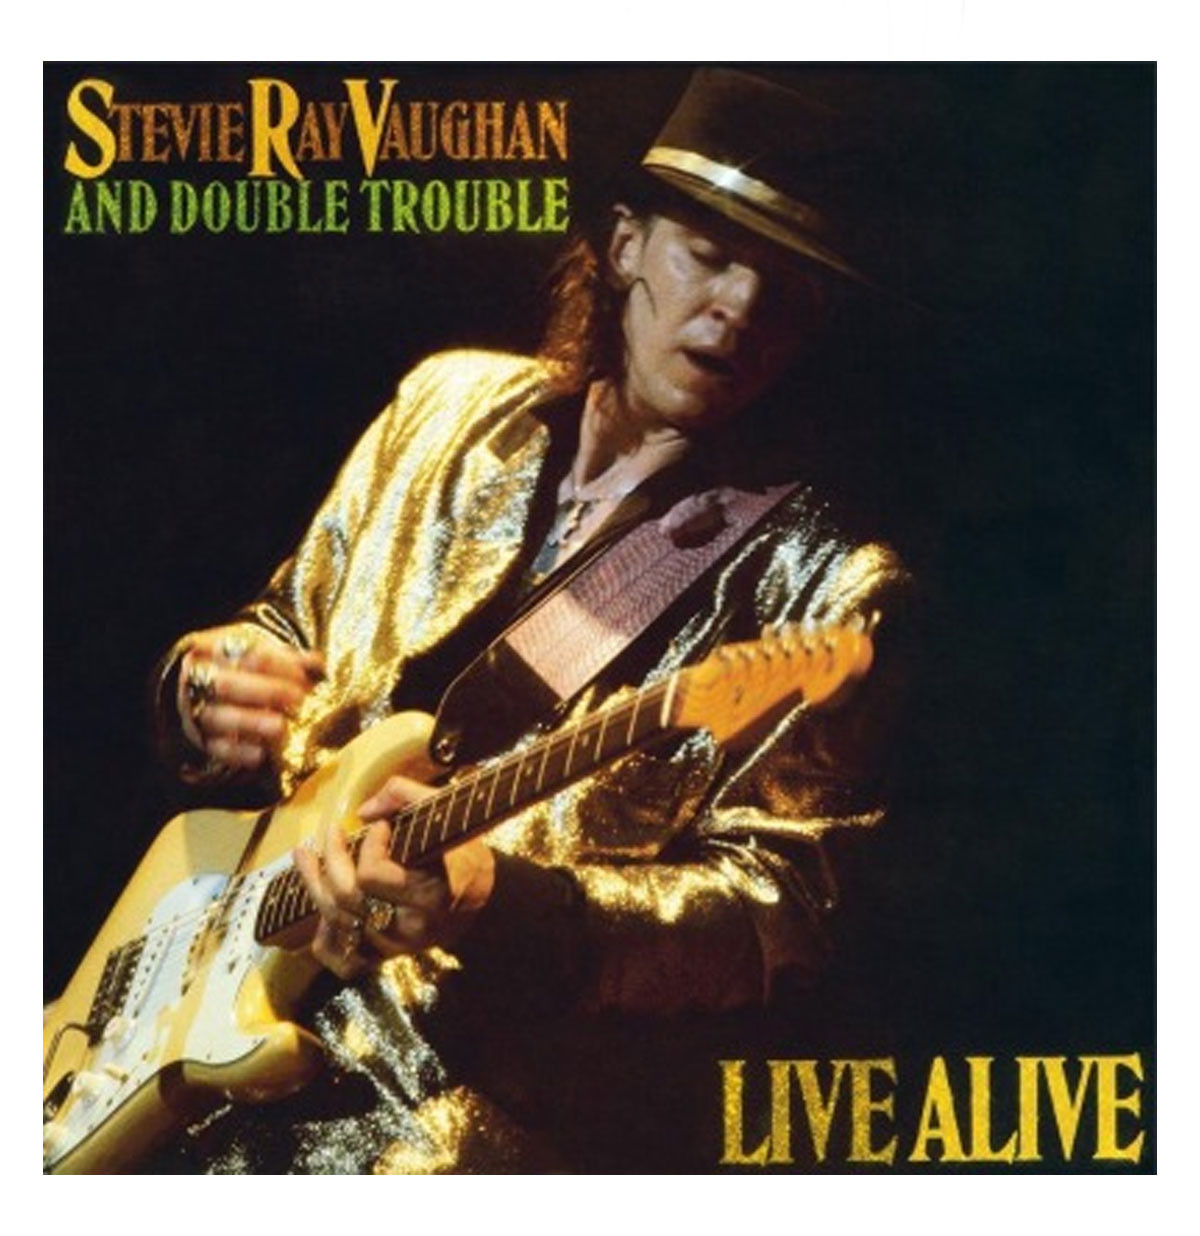 Stevie Ray Vaughan And Double Trouble - Live Alive 2LP